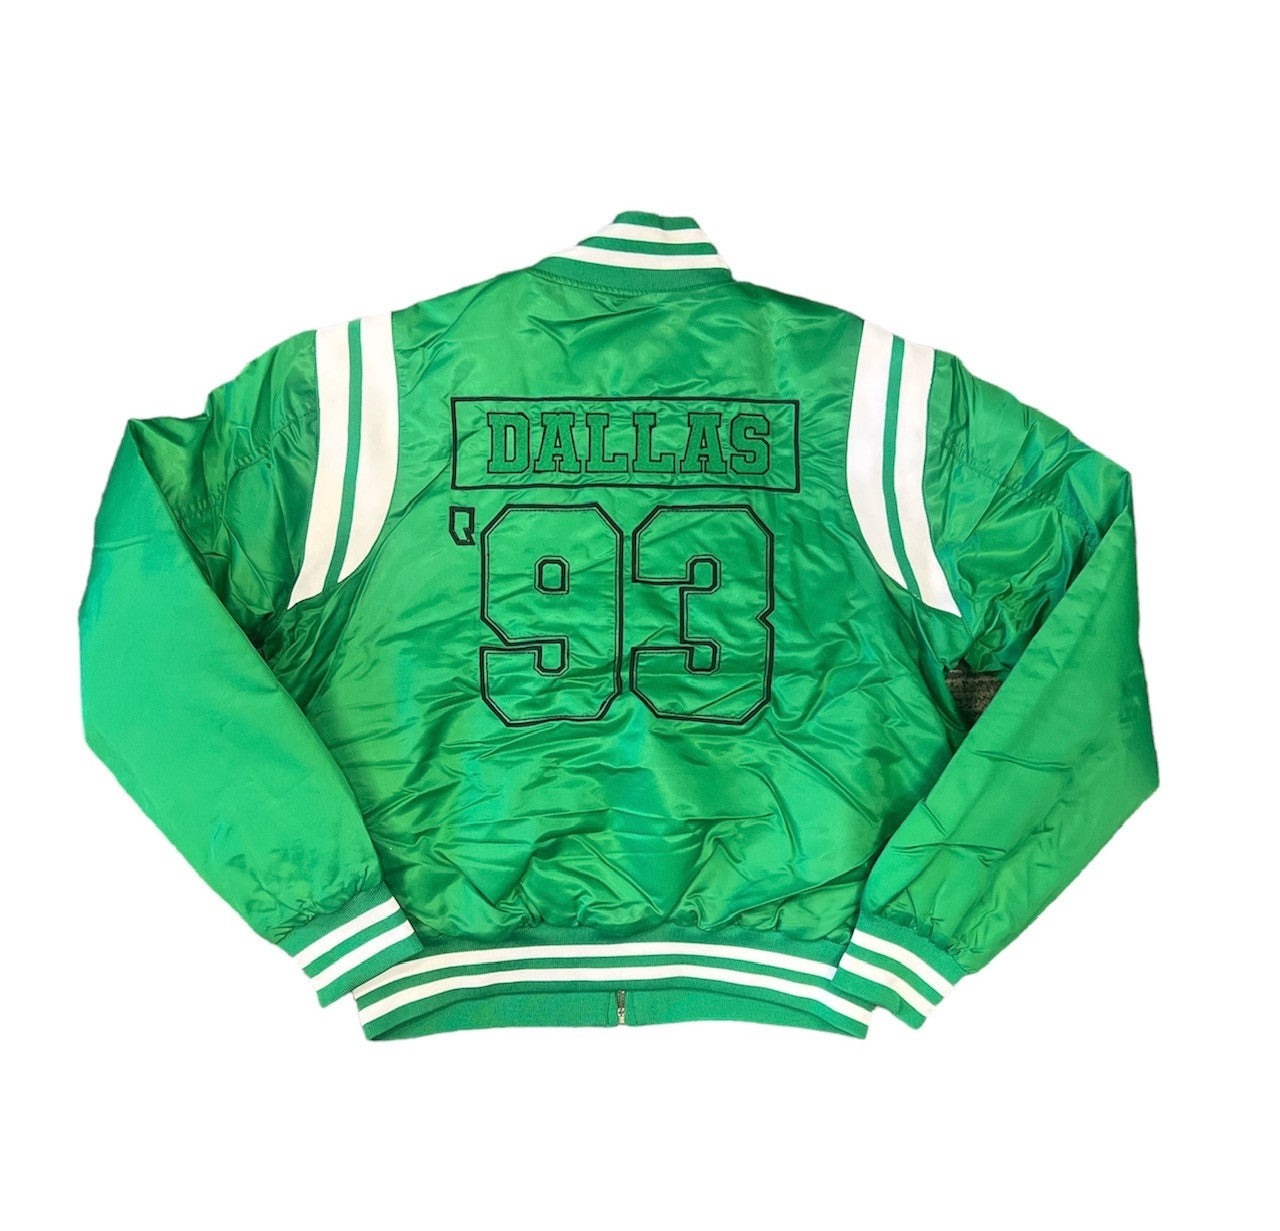 DALLAS STARS WEAR BY ERIN ANDREWS BOMBER JACKET - BACK VIEW